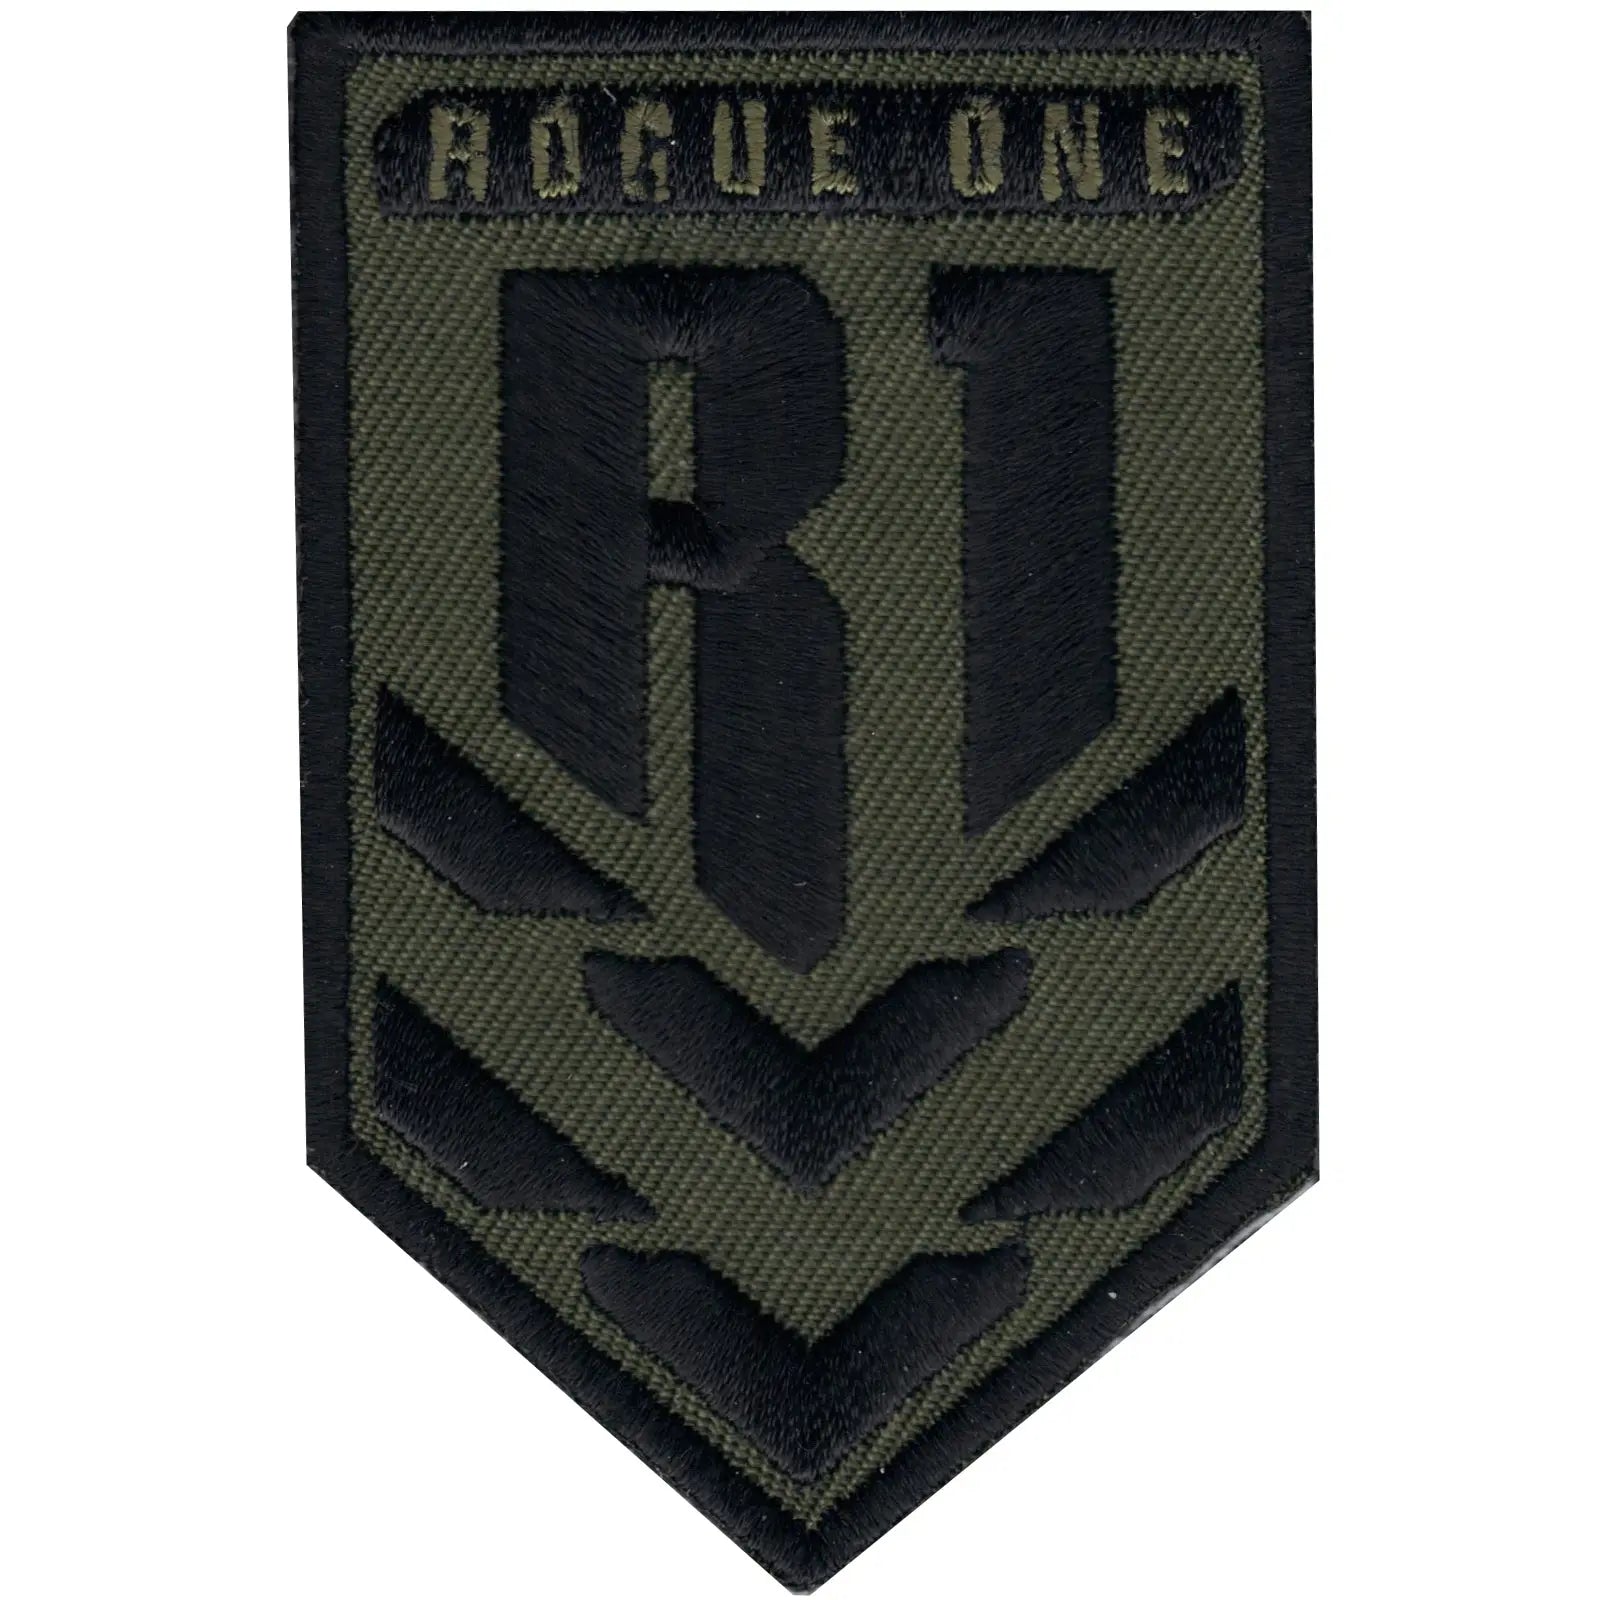 Star Wars Rogue One 'R1' Iron On Patch 